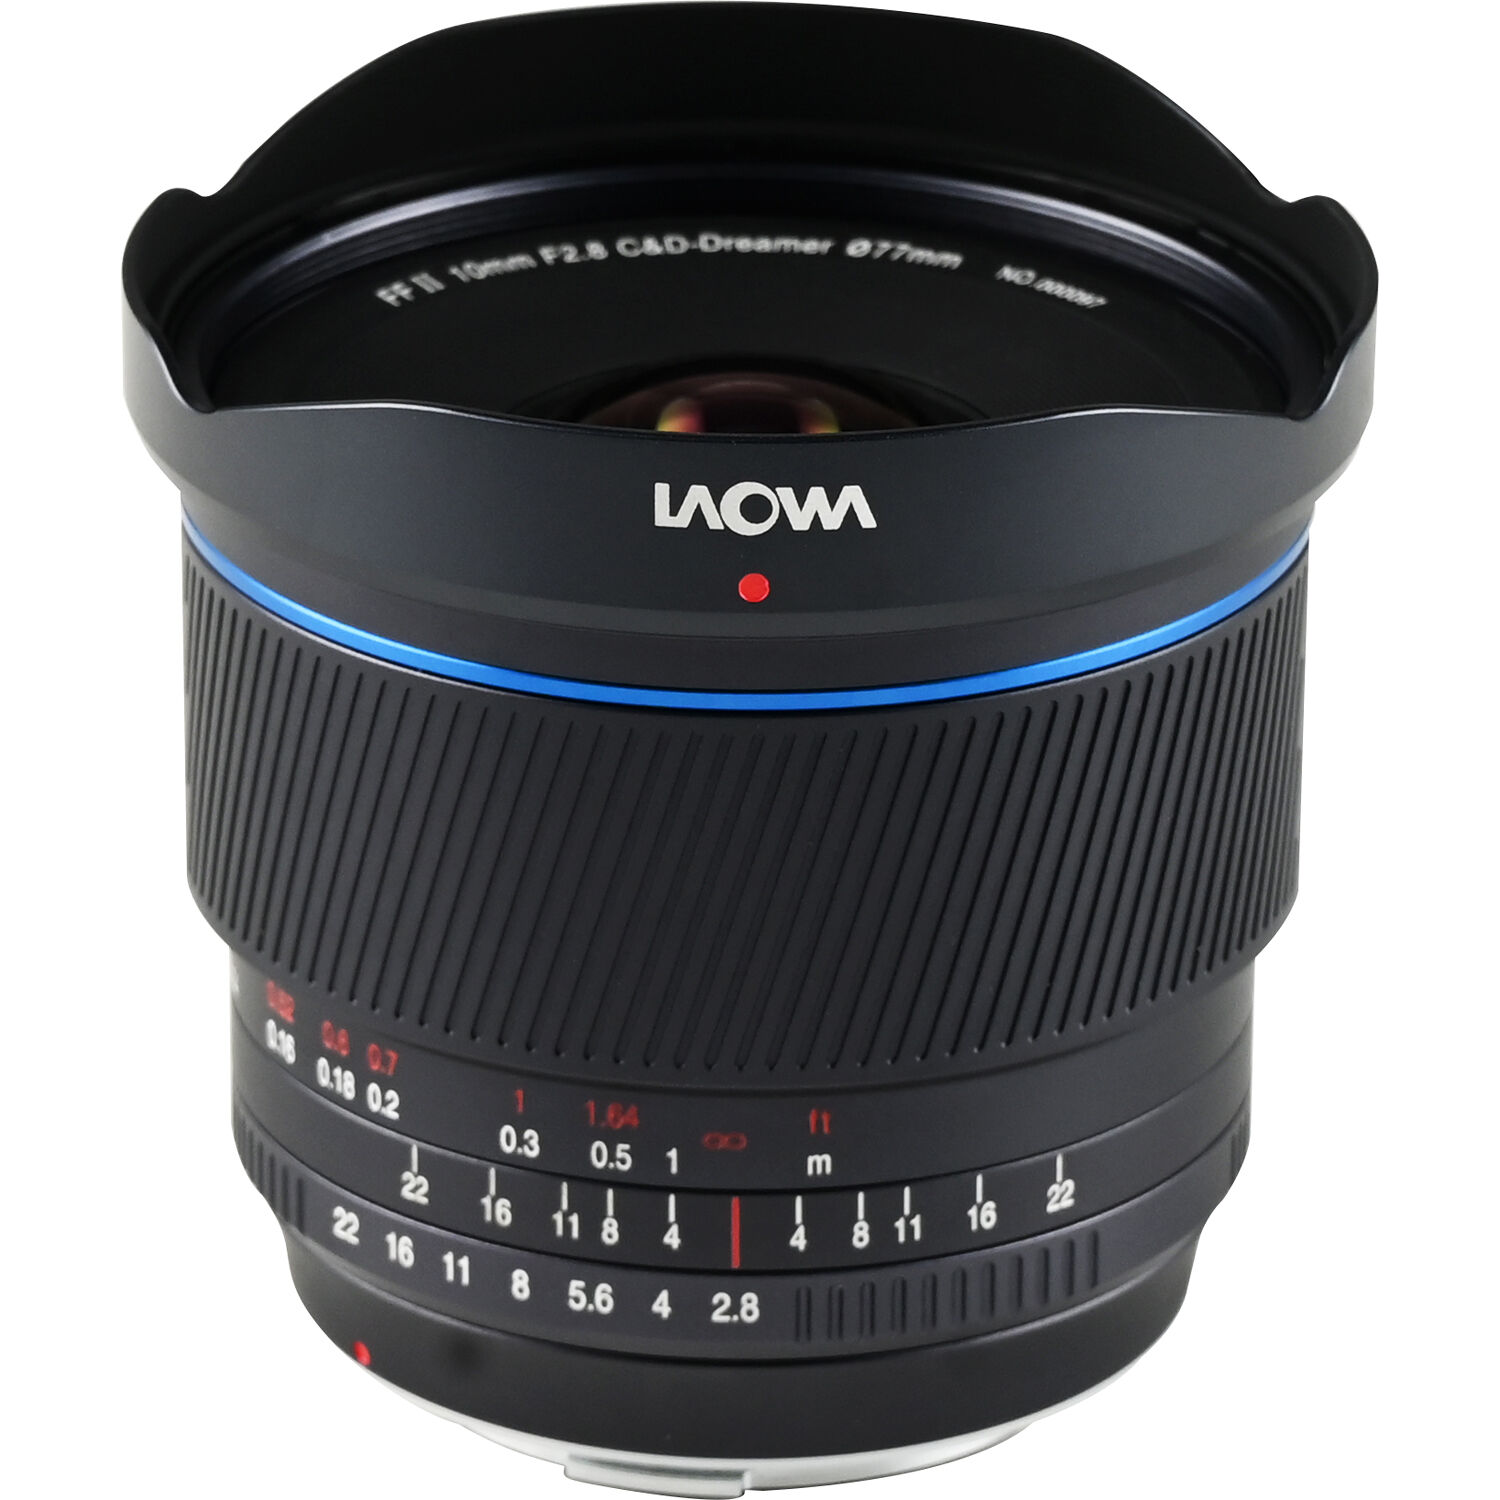 Rectilinear 10mm Full-Frame Lens with f/2.8 Aperture